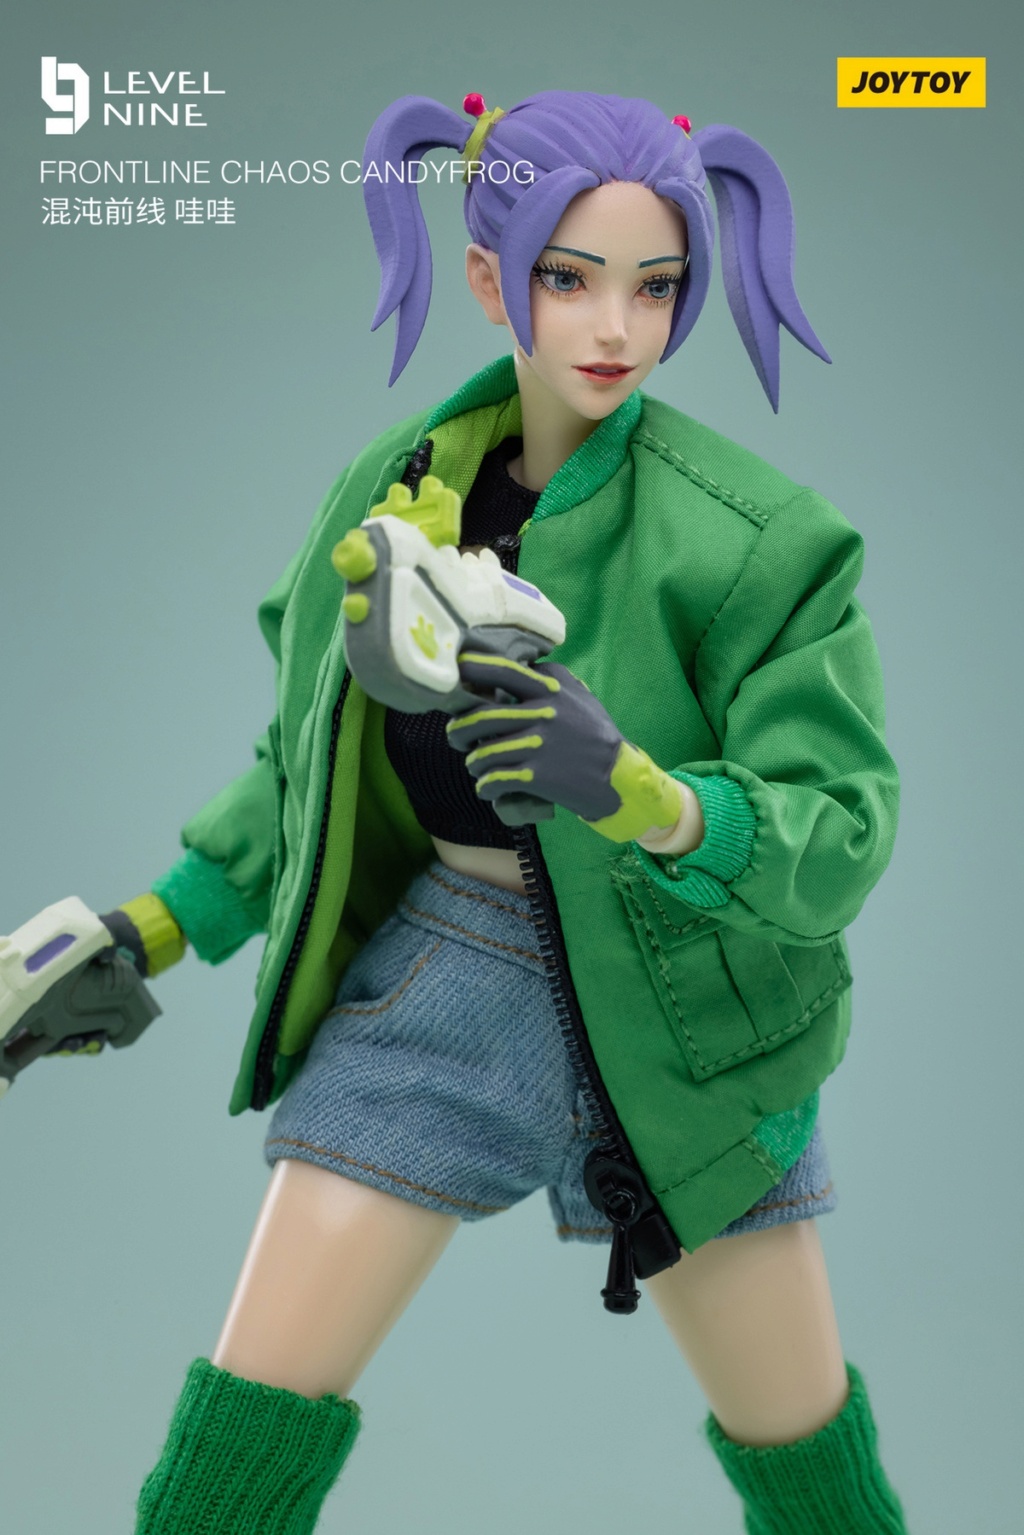 NEW PRODUCT: JOYTOY 1/12 FRONTLINE CHAOS CANDYFROG Chaos Frontline Wow 2125